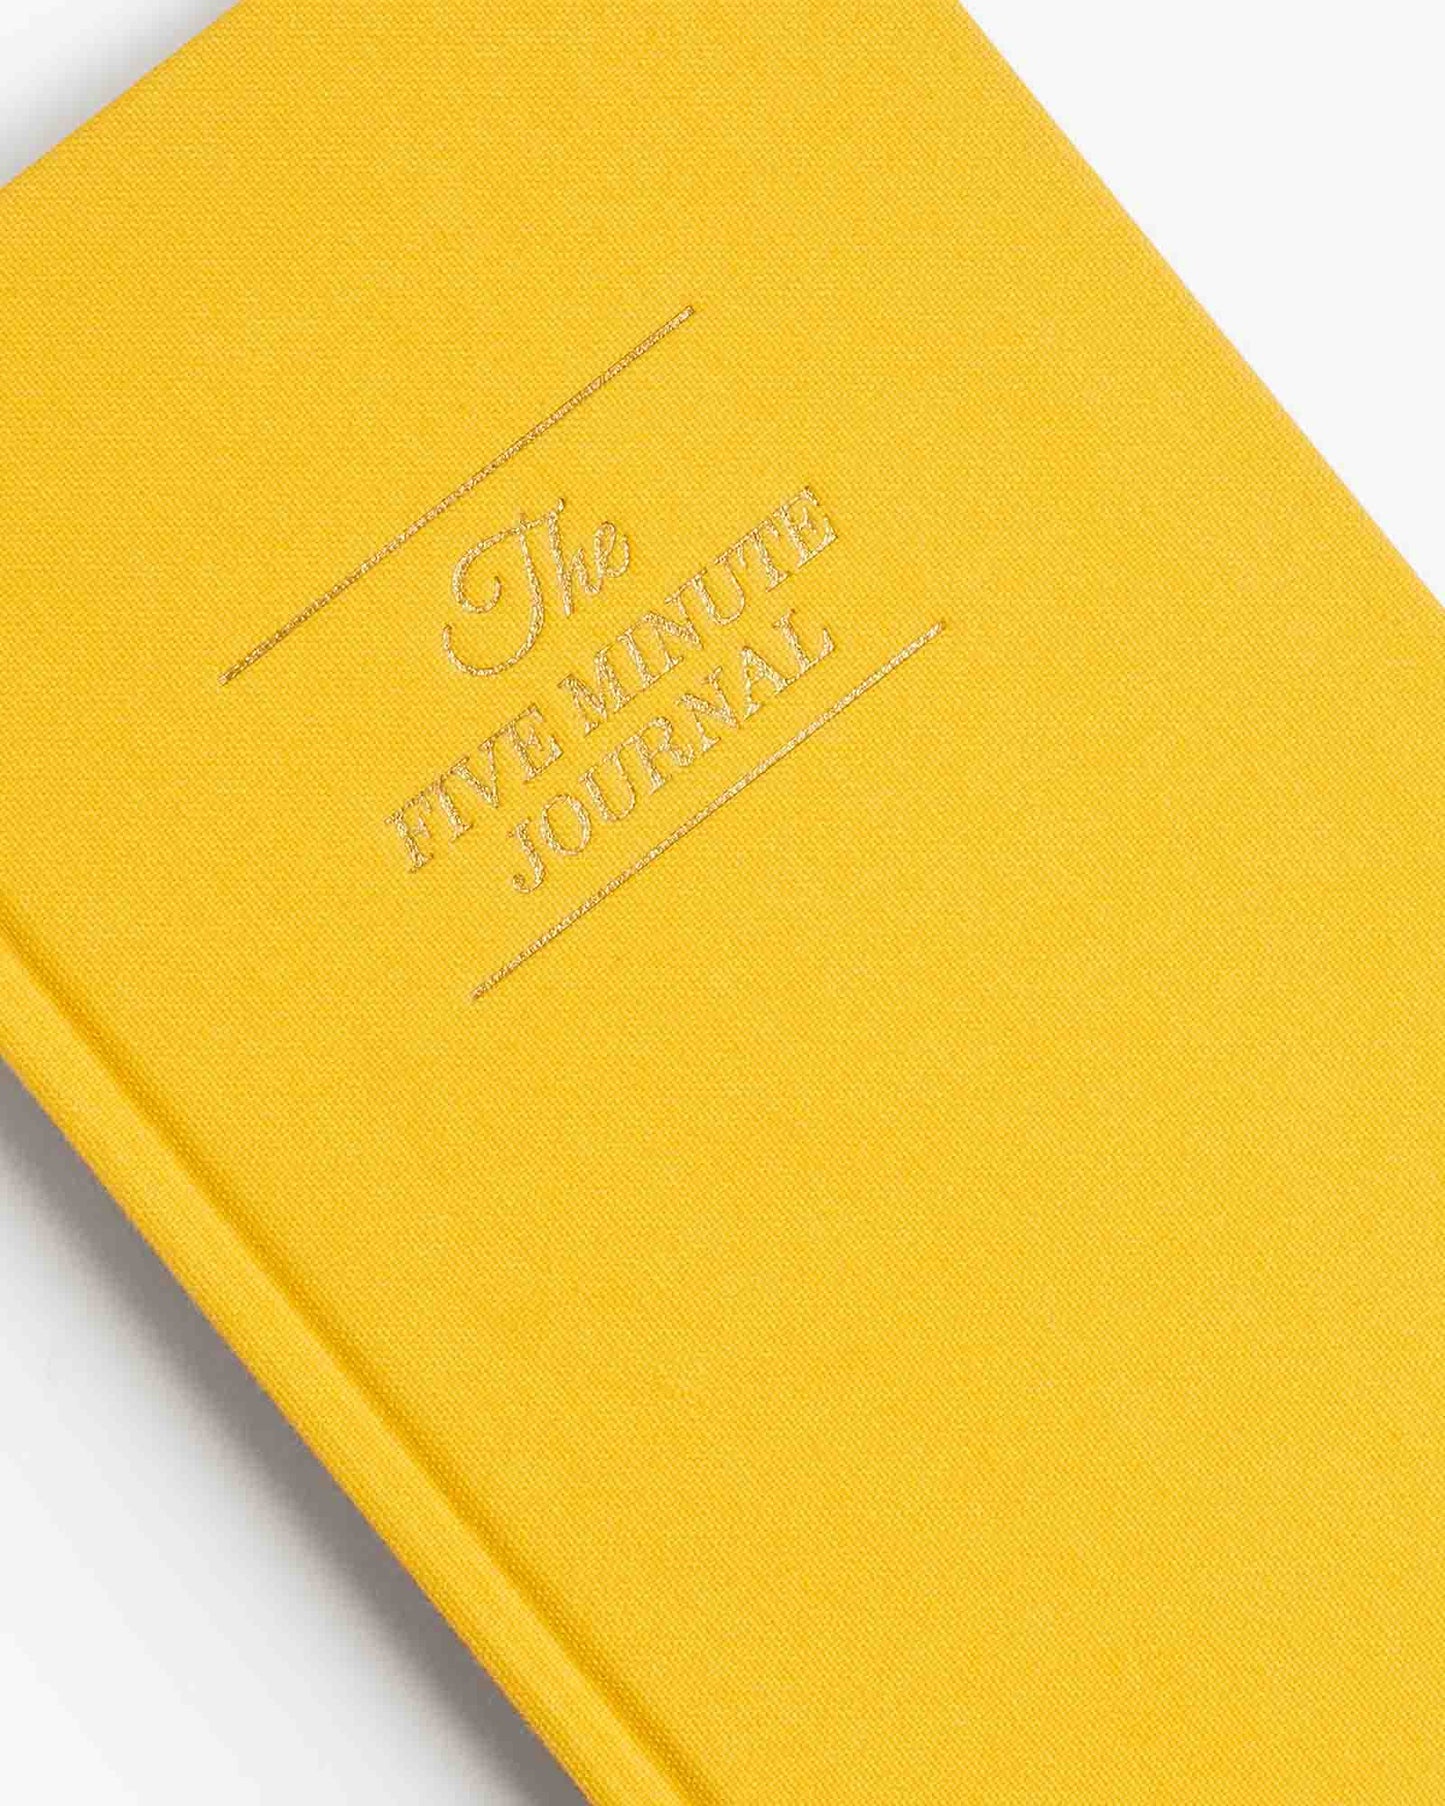 The Five Minute Journal - Sunshine Yellow by Intelligent Change